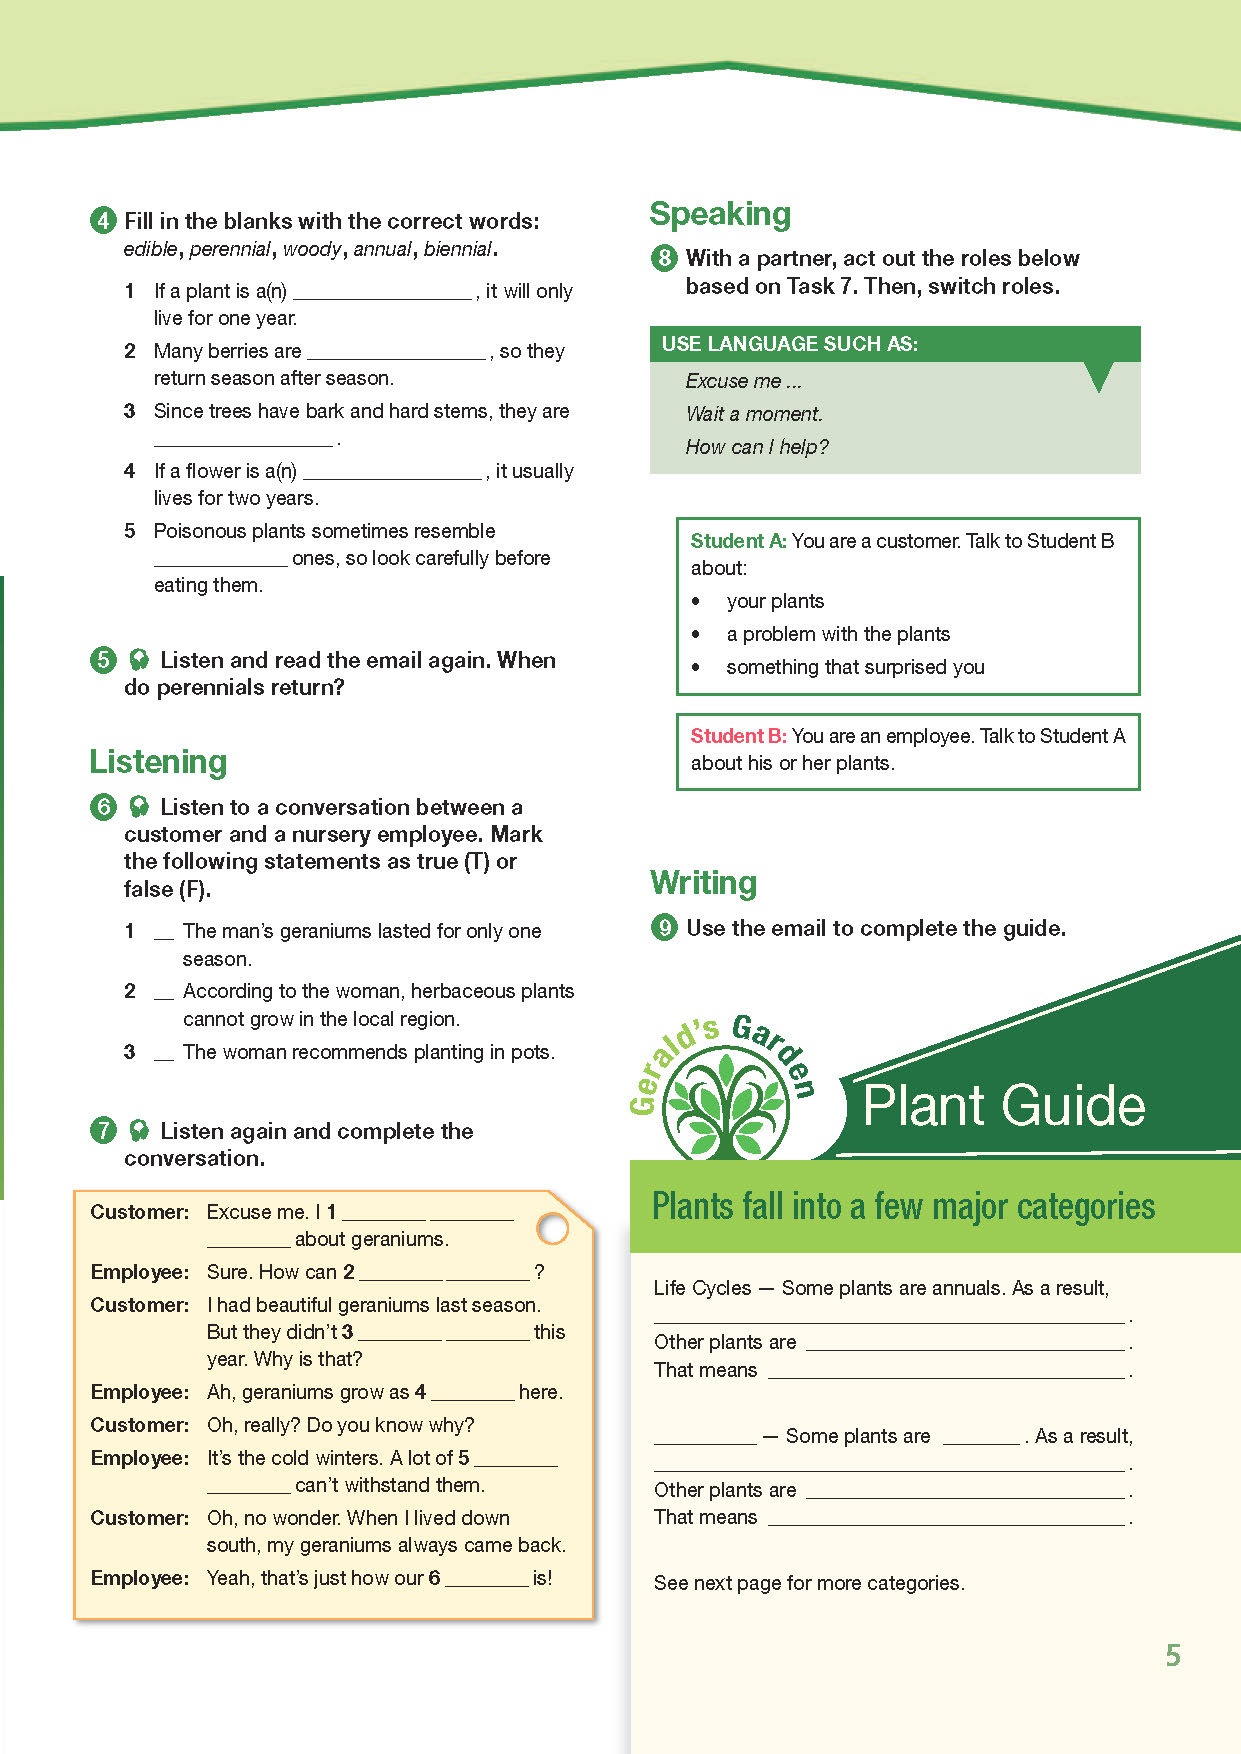 ESP English for Specific Purposes - Career Paths: Plant Production - Sample Page 2